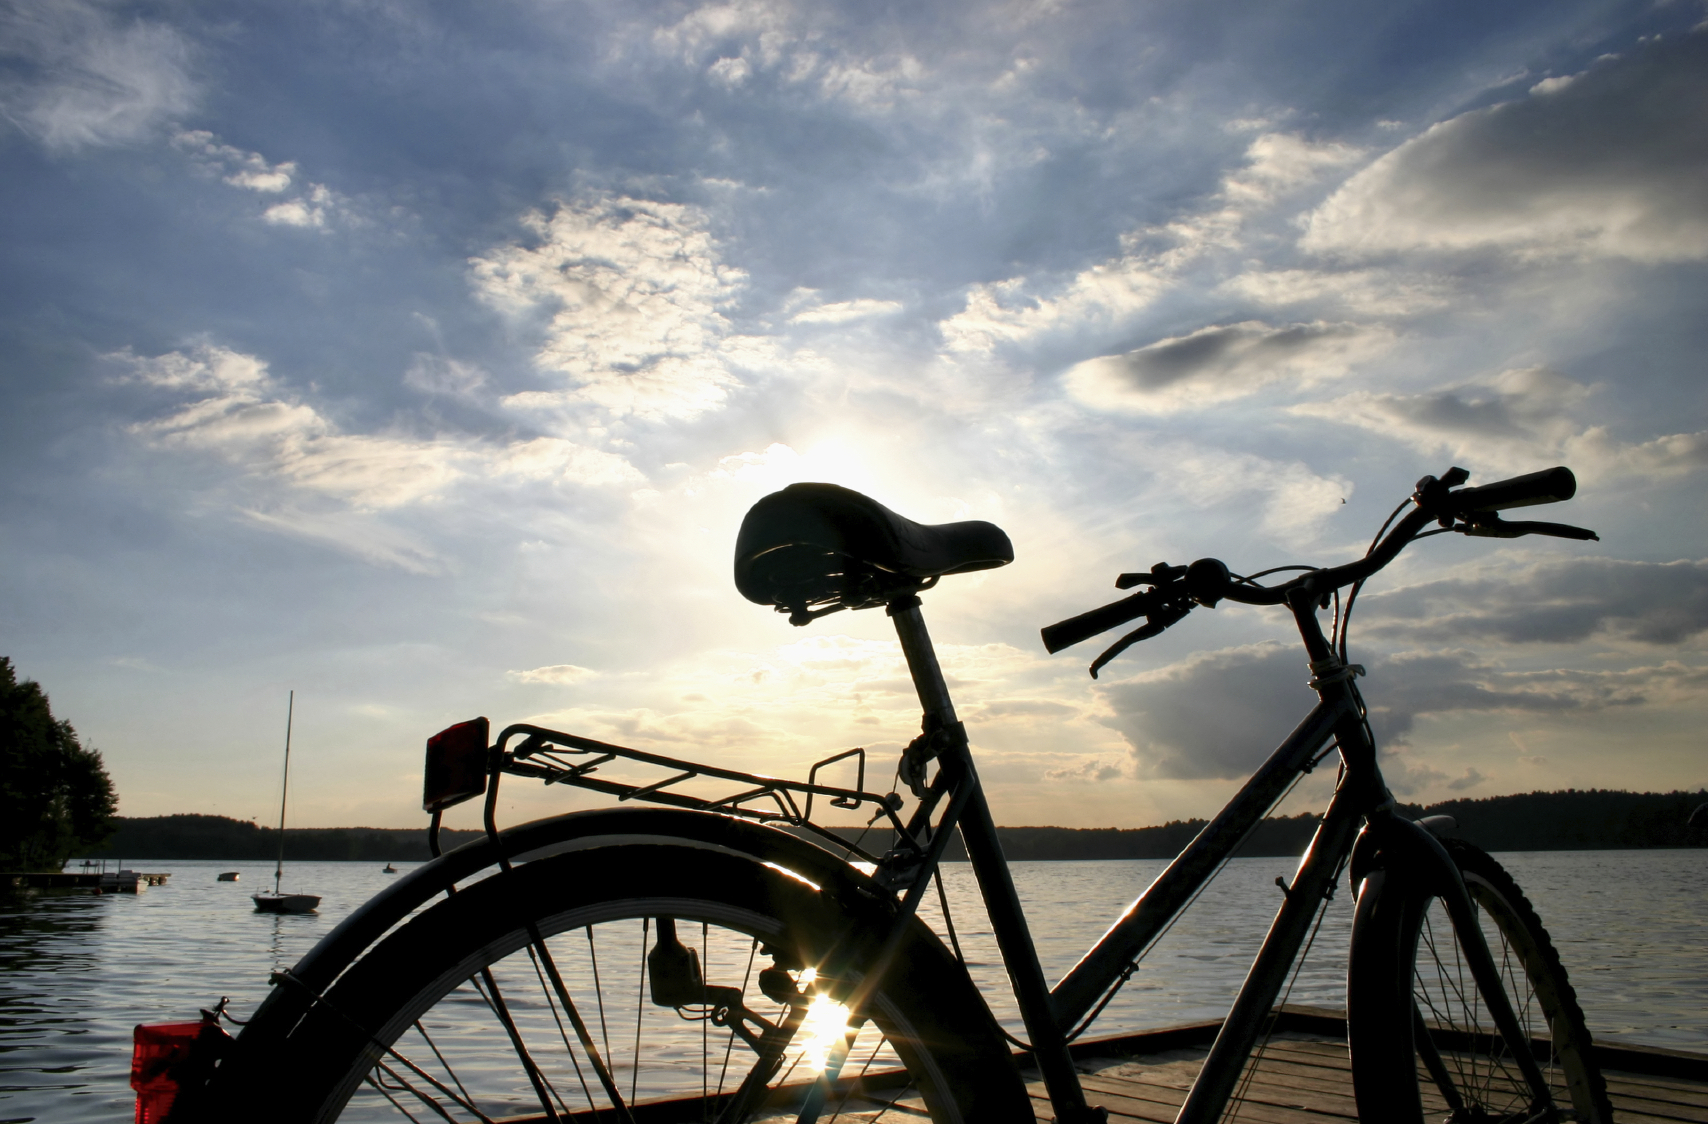 Silhouette of bycicle against lake